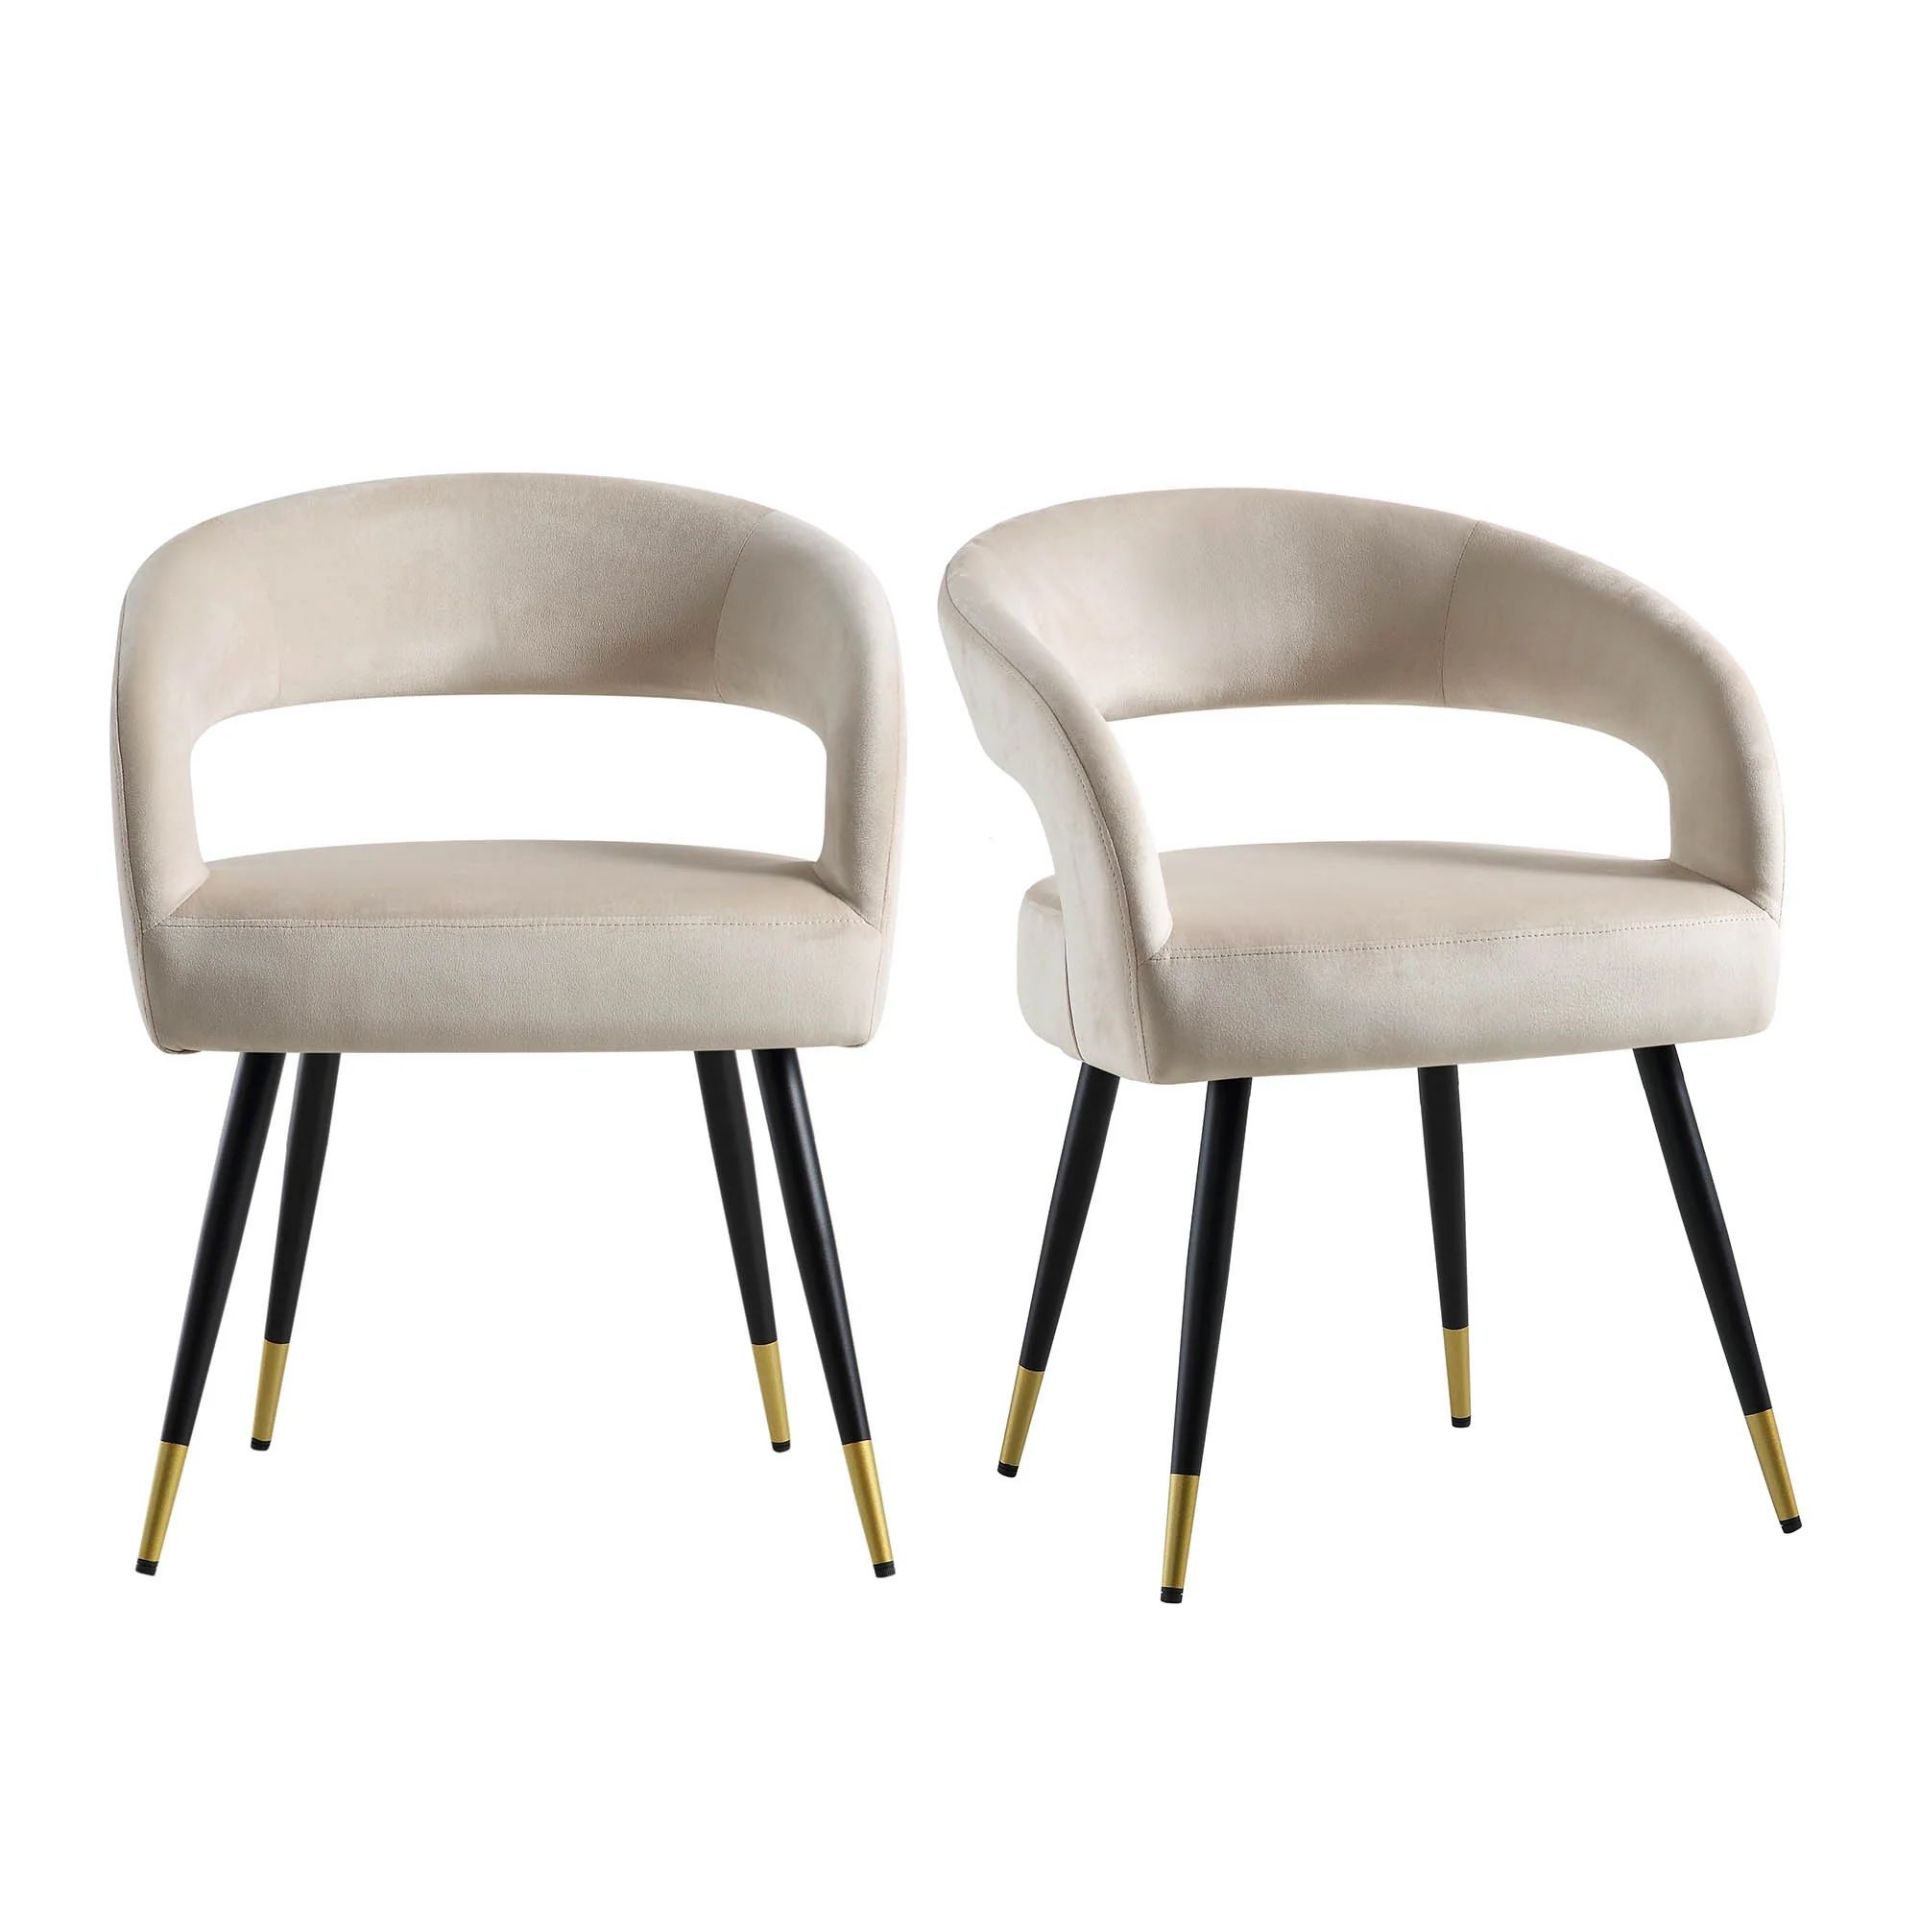 Laurel Wave Champagne Velvet Set of 2 Dining Chairs. - R19.2. RRP £299.99. The curved cut out - Image 2 of 4